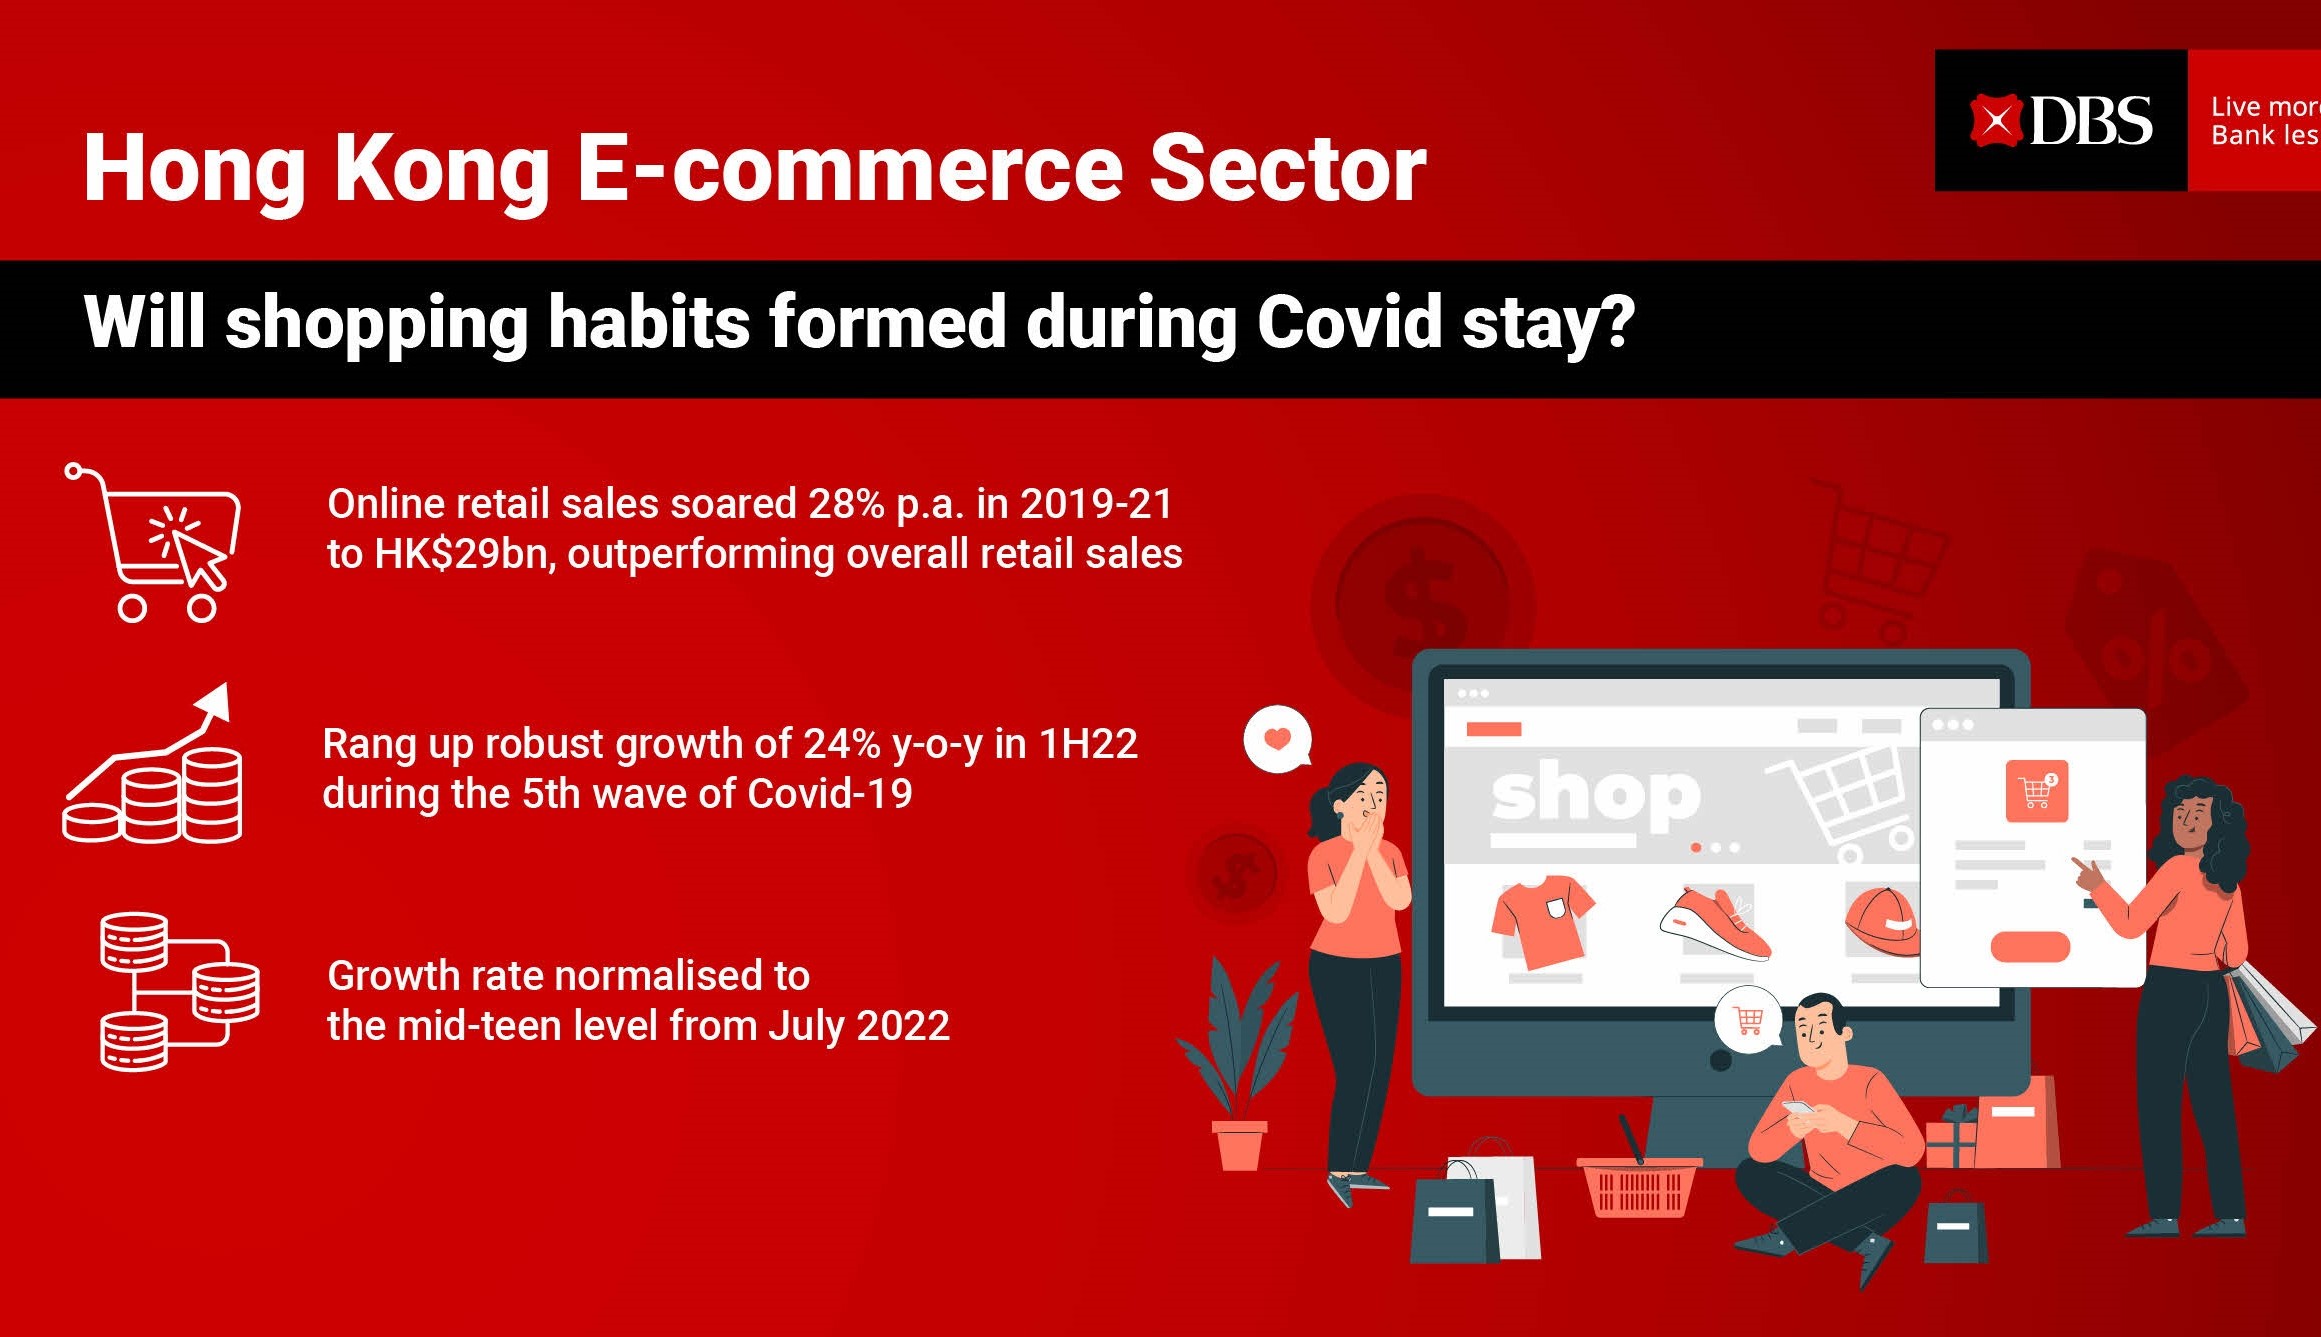 Will shopping habits formed during Covid stay?